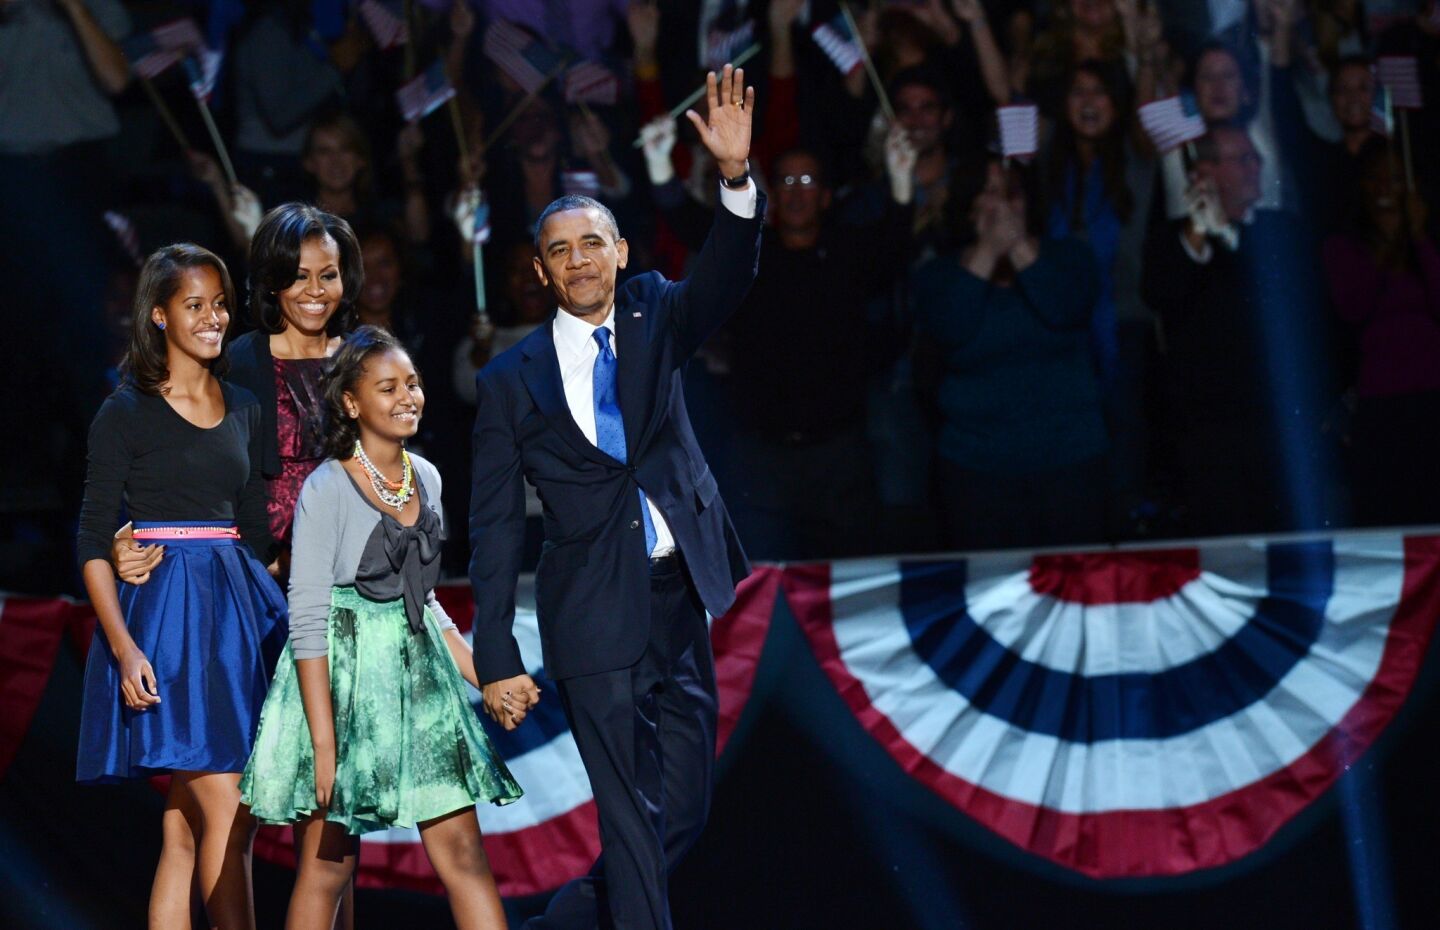 President Obama and his family arrive onstage after his victory in the 2012 presidential election.